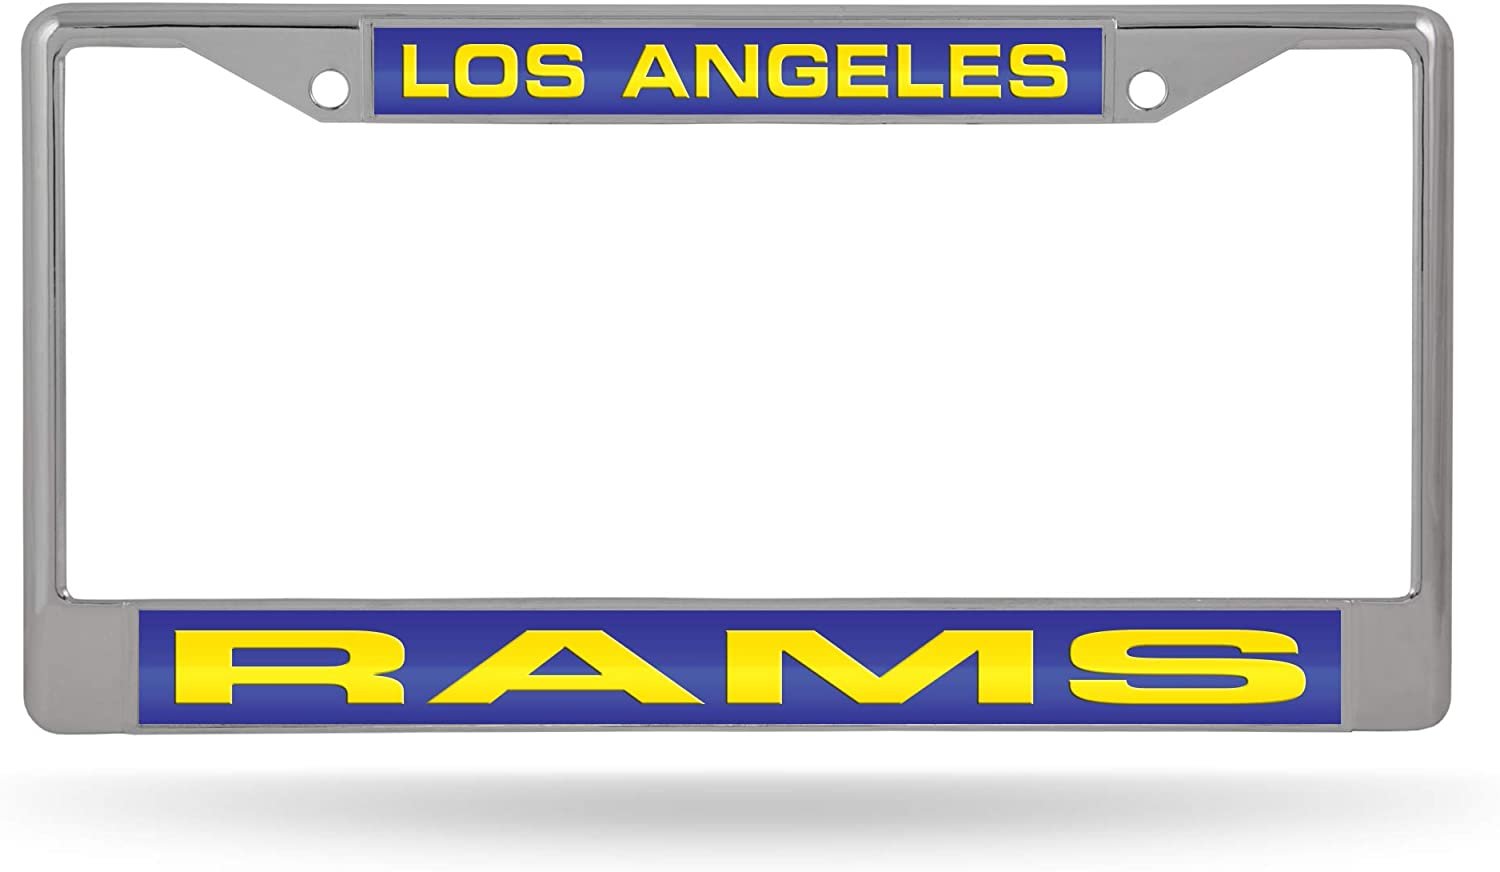 Los Angeles Rams Metal License Plate Frame Chrome Tag Cover, Laser Acrylic Mirrored Inserts, 12x6 Inch